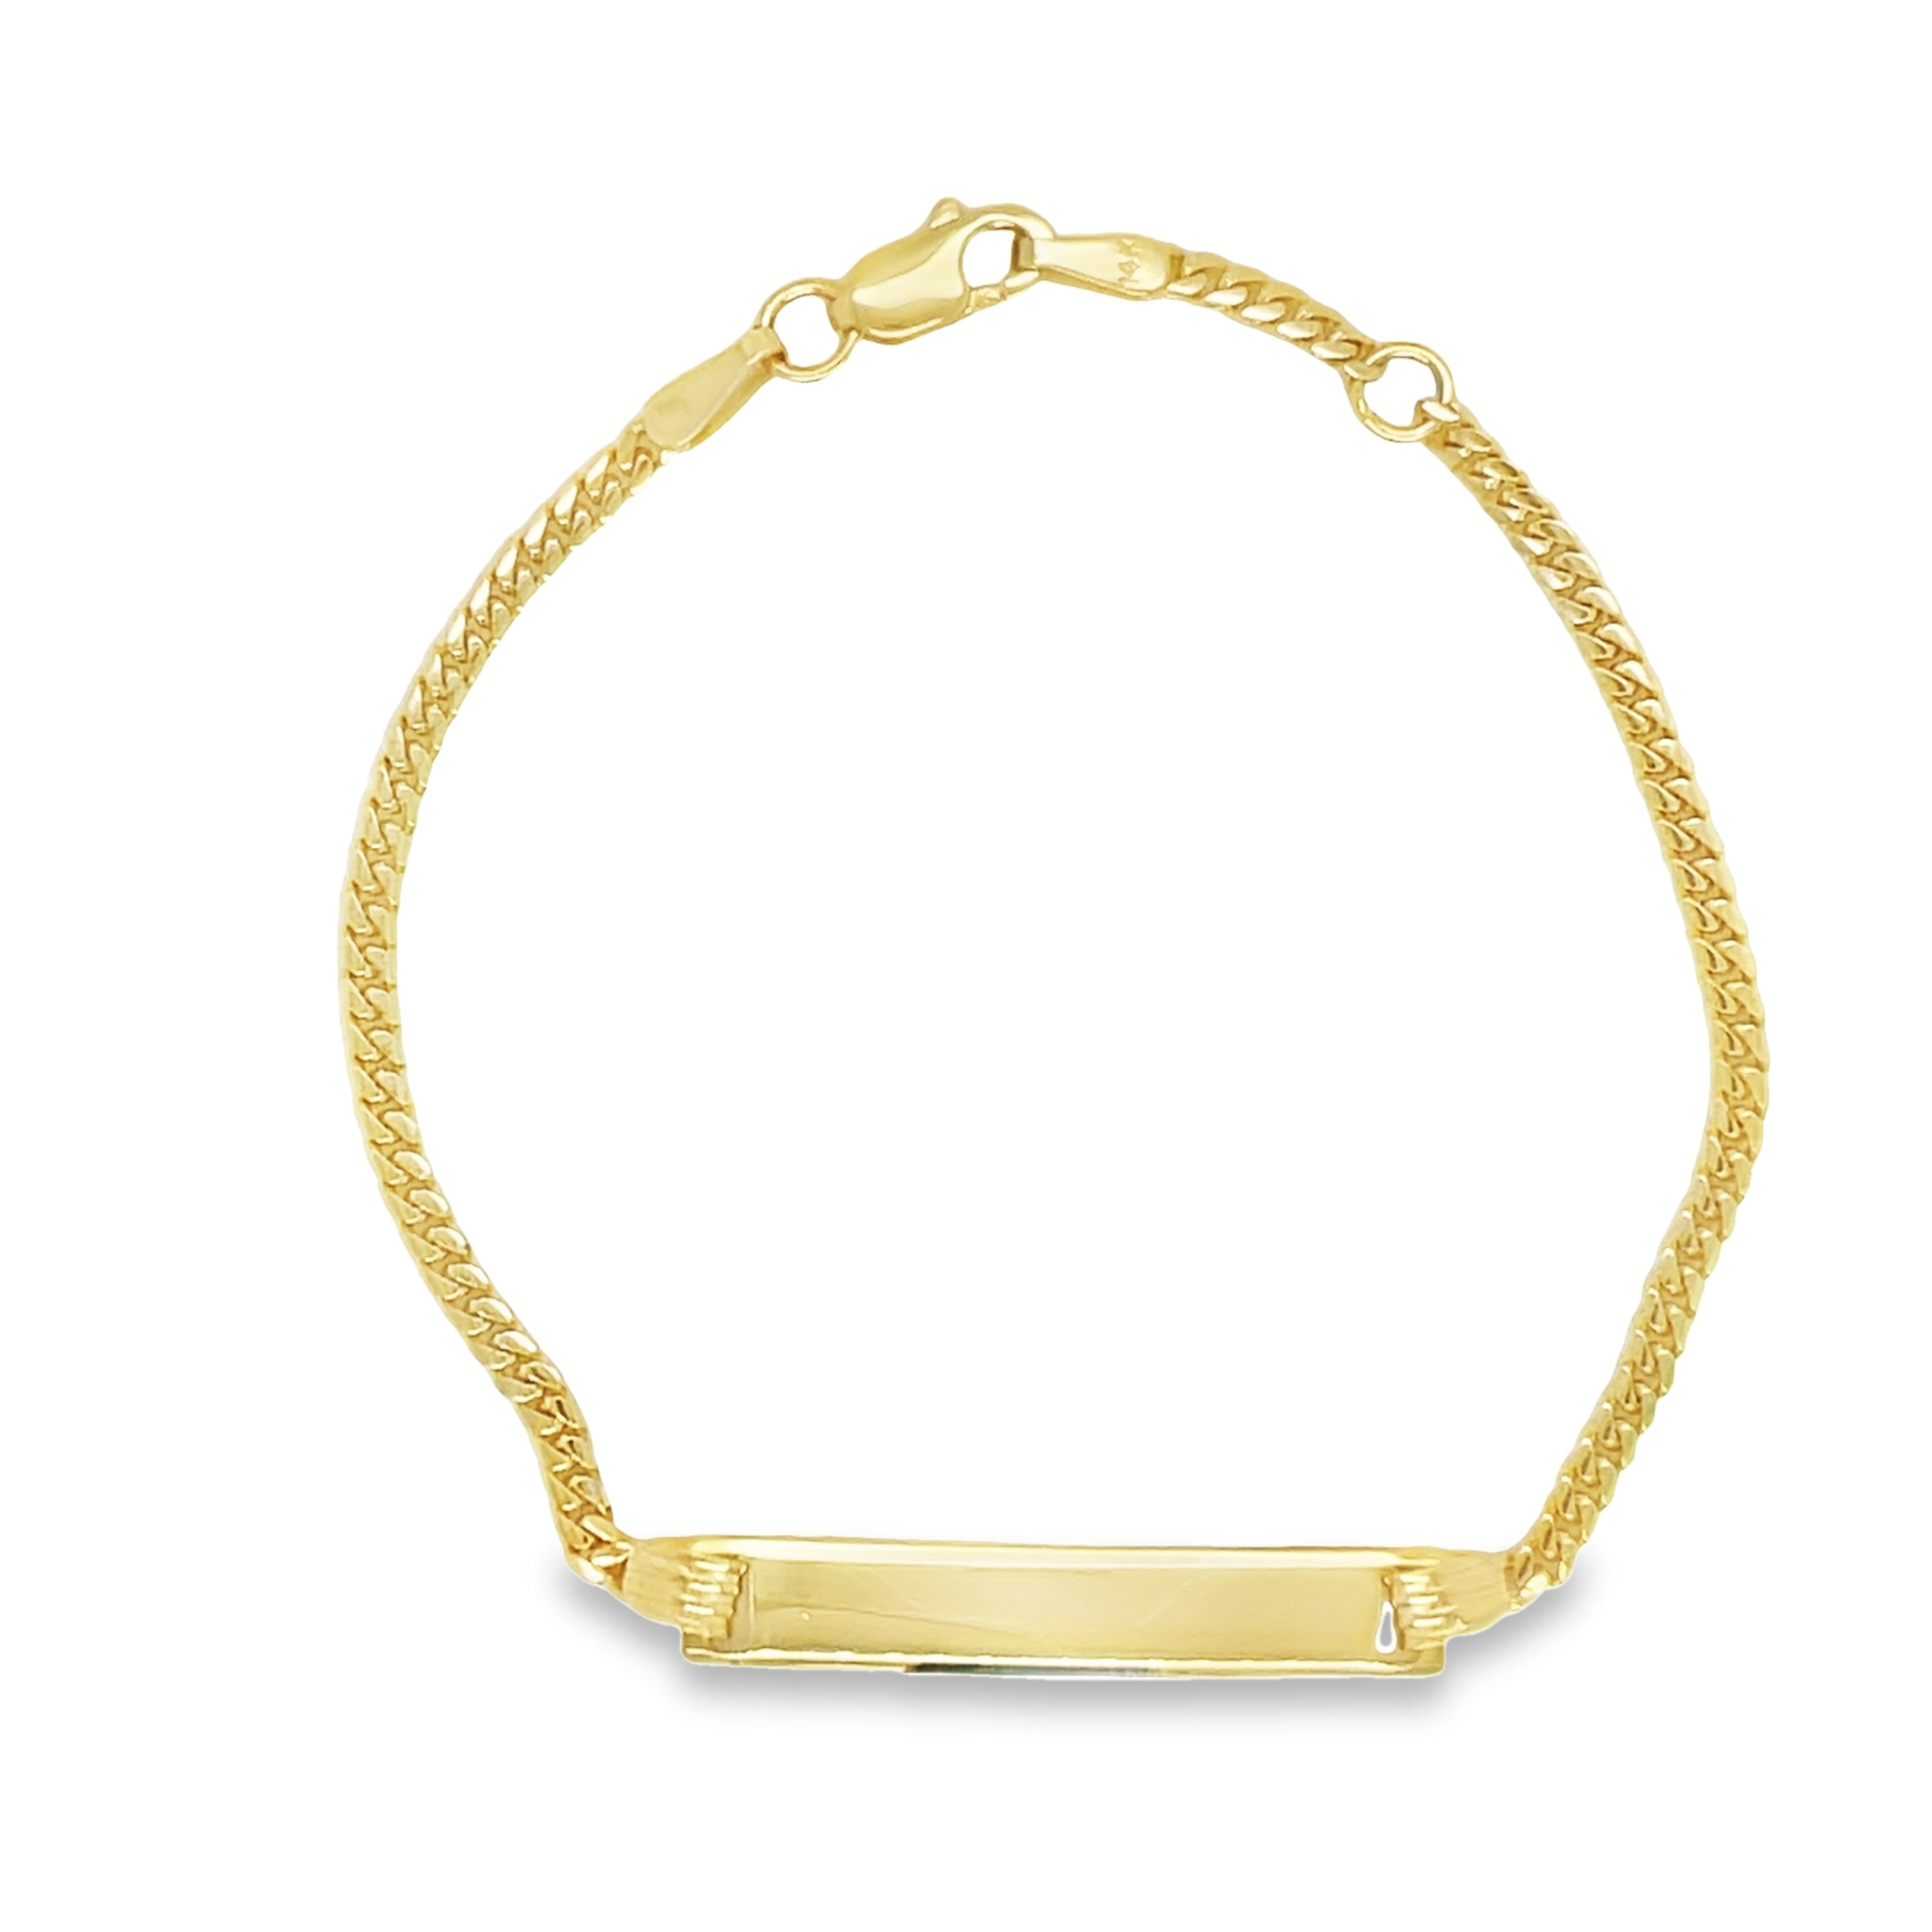 This beautiful 14k yellow gold ID bracelet is the perfect way to keep your child safe. It has a secure lobster catch and is 5.5" long – perfect for little wrists. A small ID completes this stylish look. Let your child sparkle with confidence.